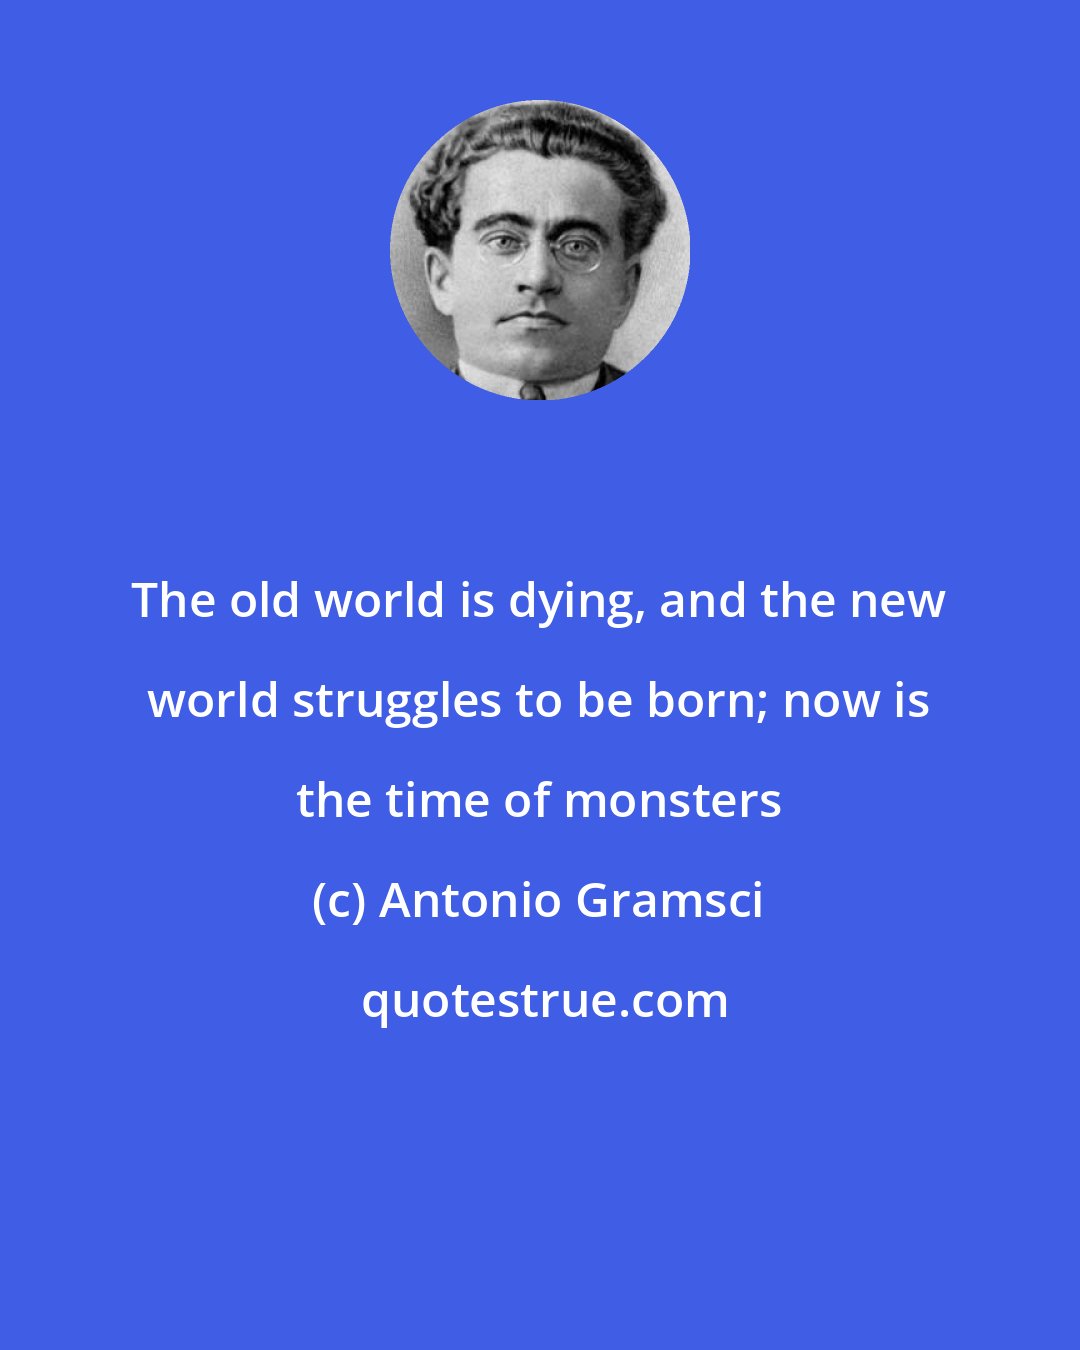 Antonio Gramsci: The old world is dying, and the new world struggles to be born; now is the time of monsters